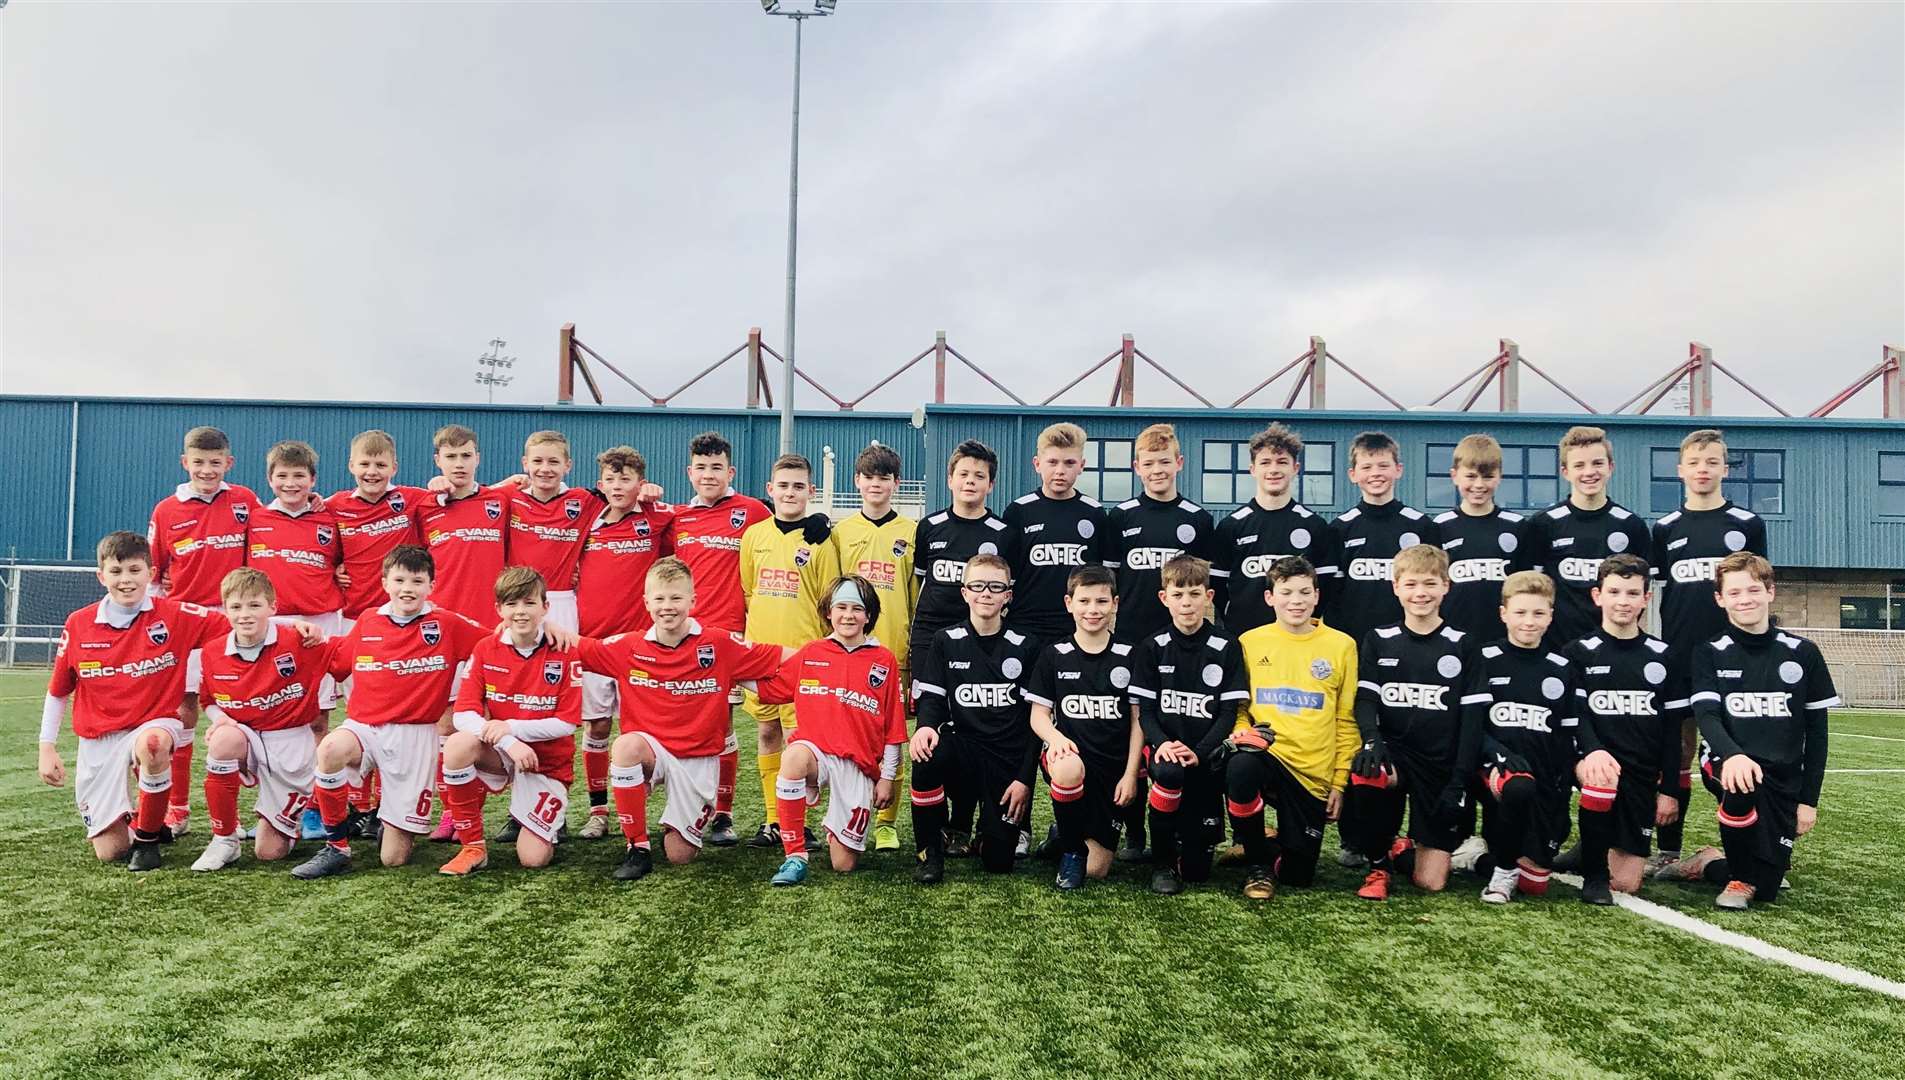 Ross County and Caithness United under-13s at the Highland Football Academy, where the Scottish Premiership club ran out 4-0 winners.